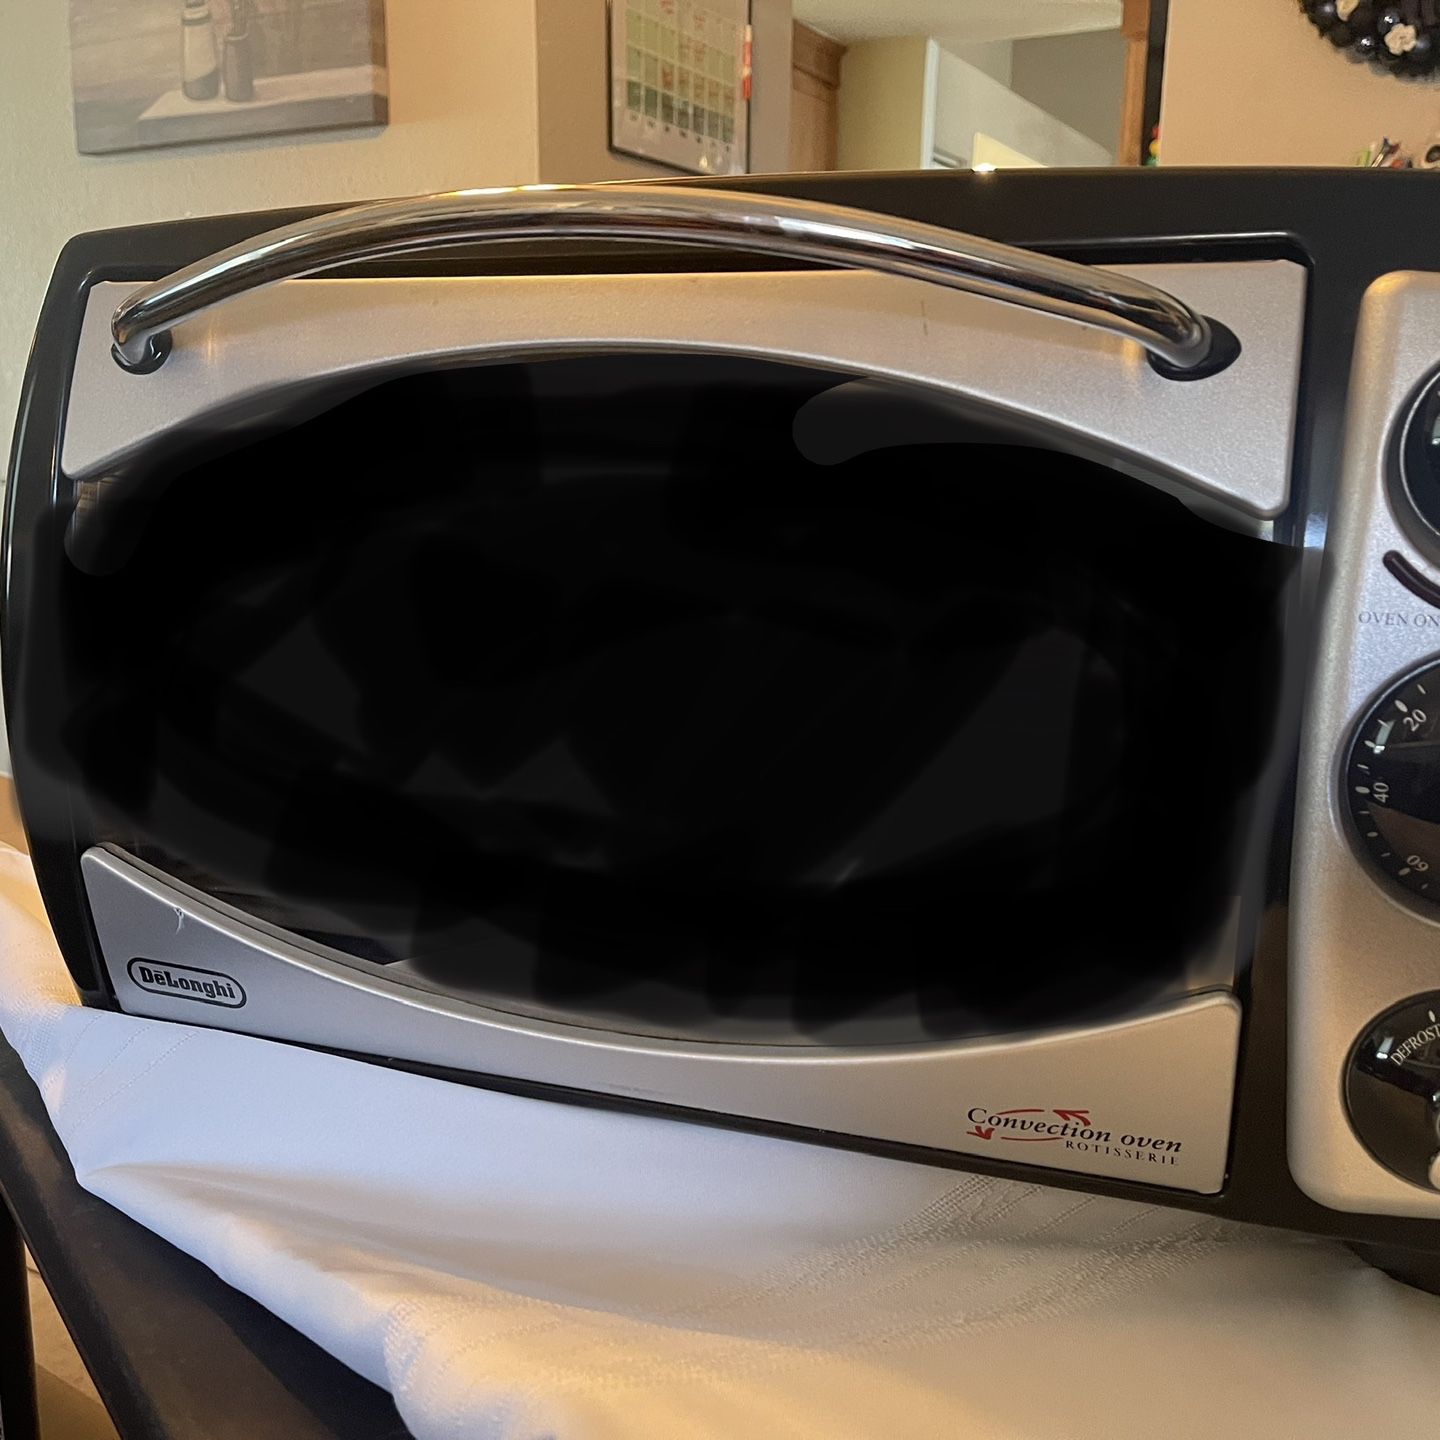 Toshiba Toaster Oven for Sale in Long Beach, CA - OfferUp